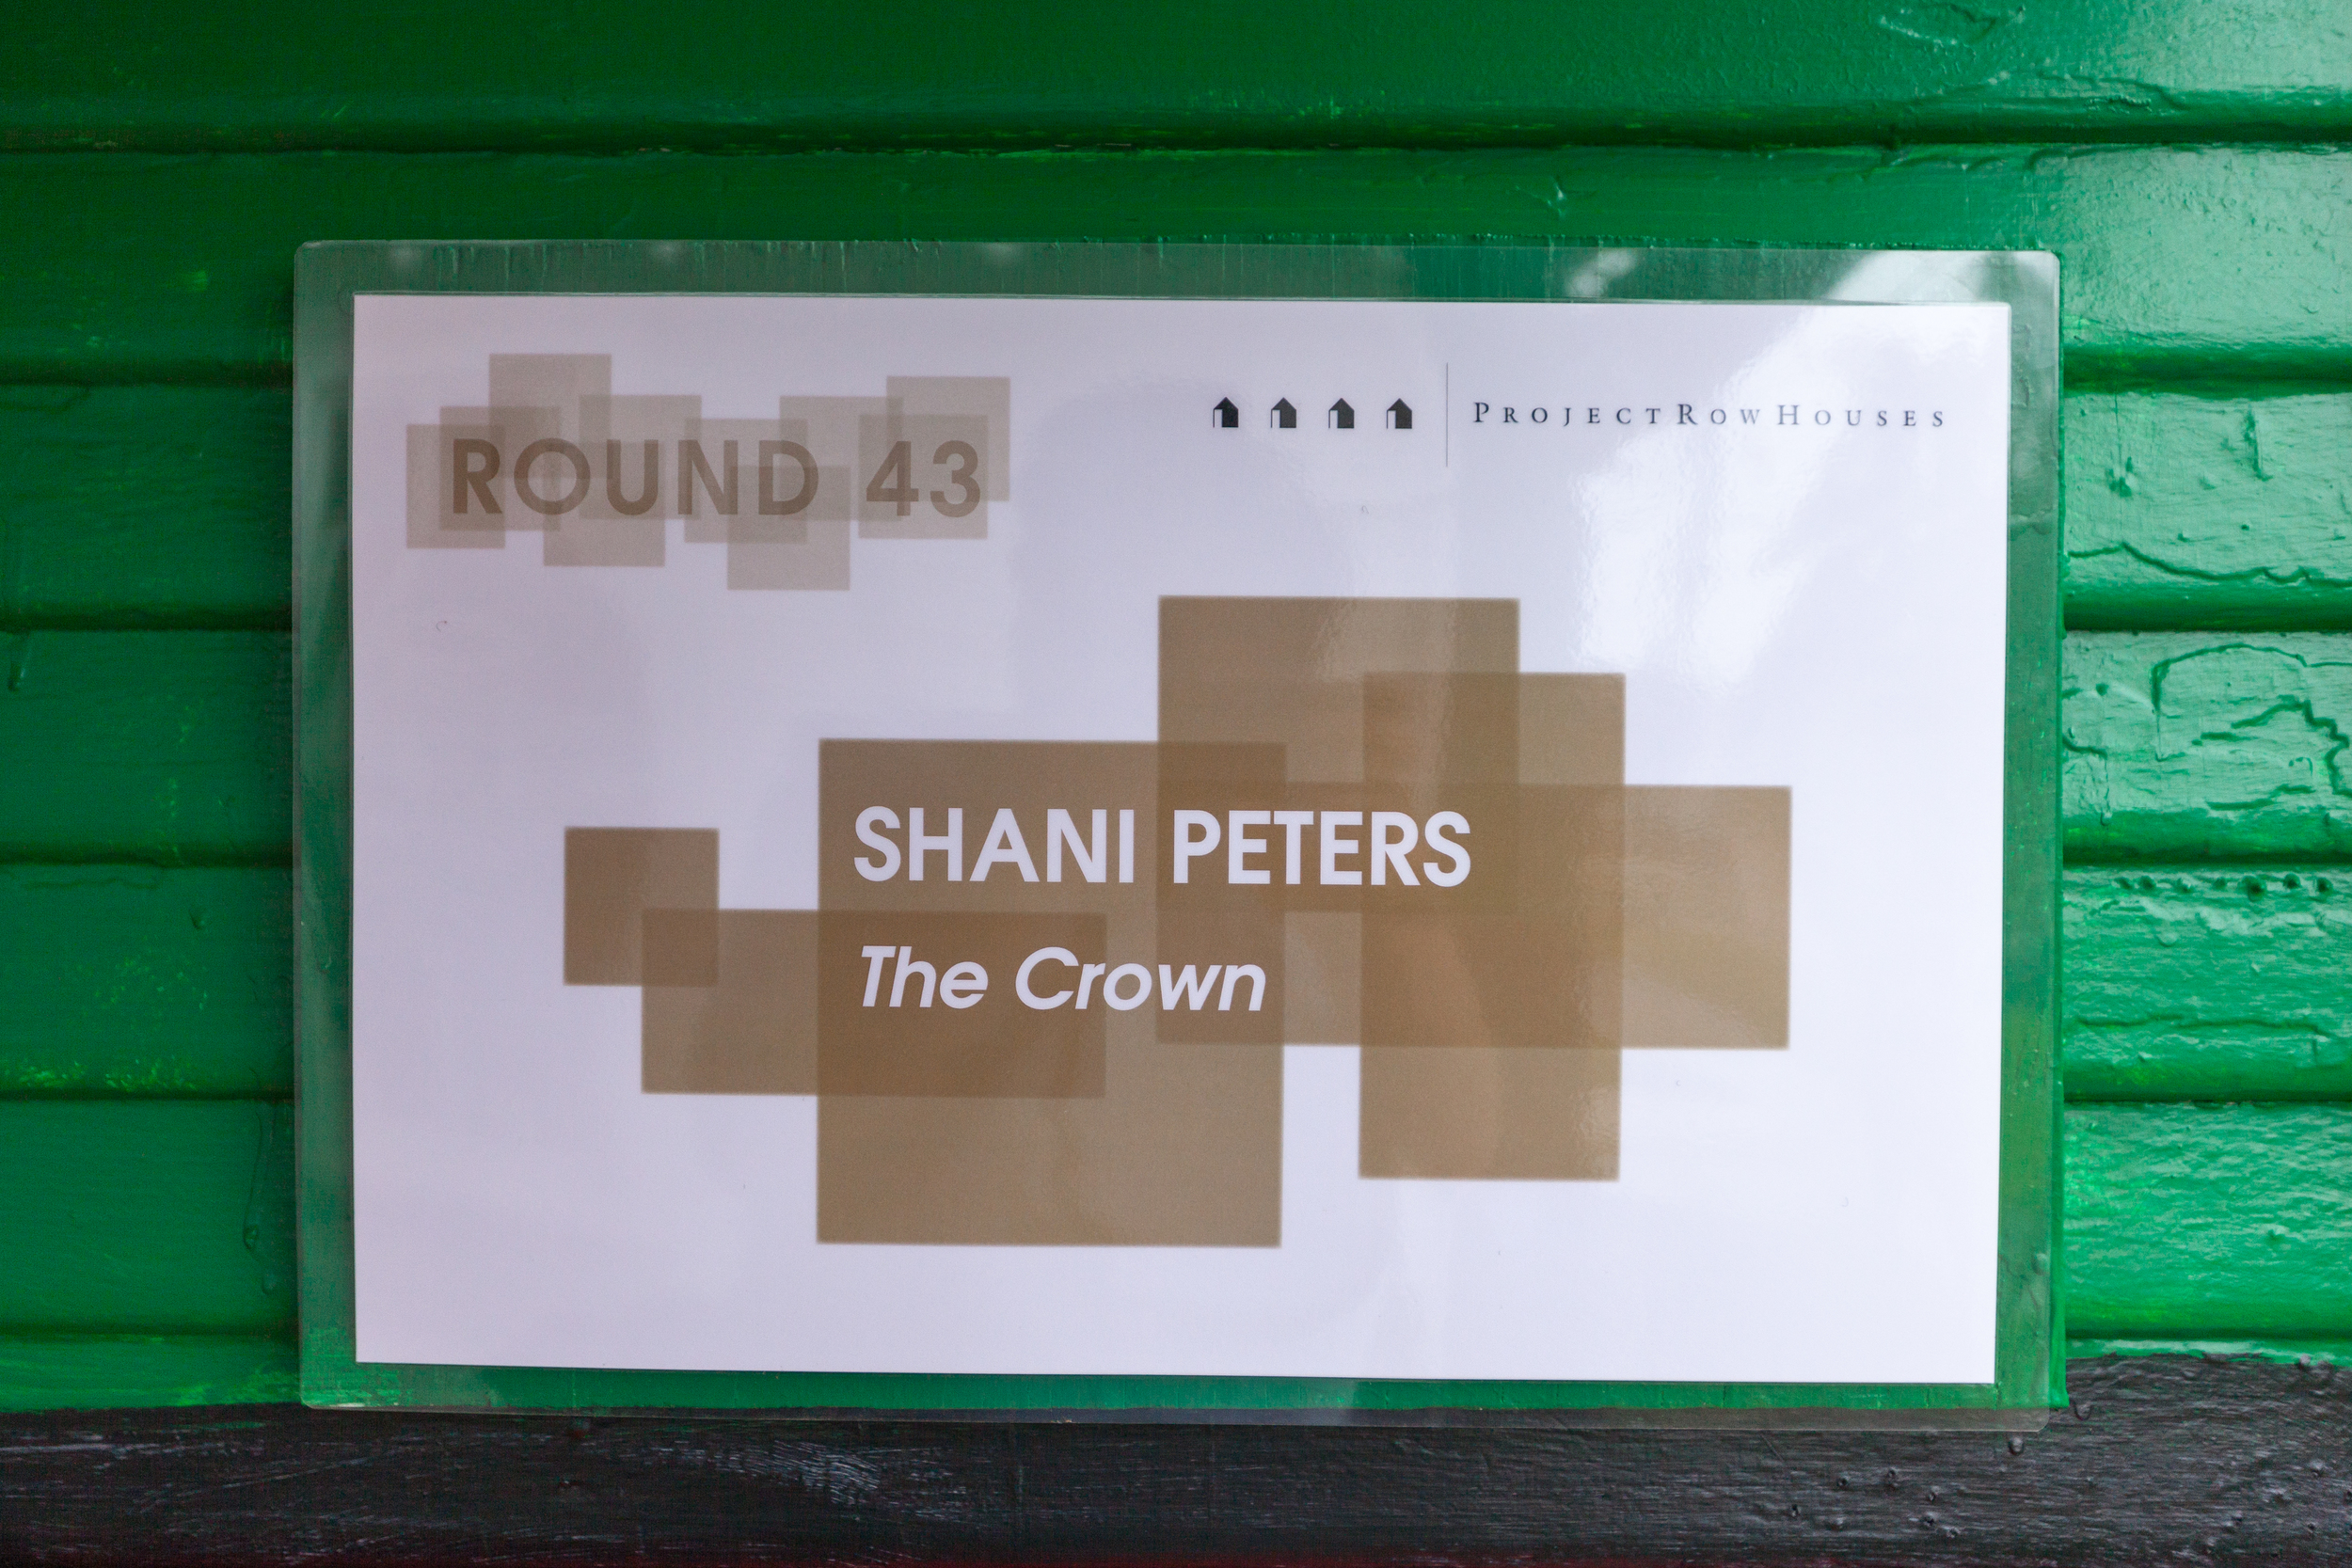  The Crown , Shani Peters 2507 Holman St. 